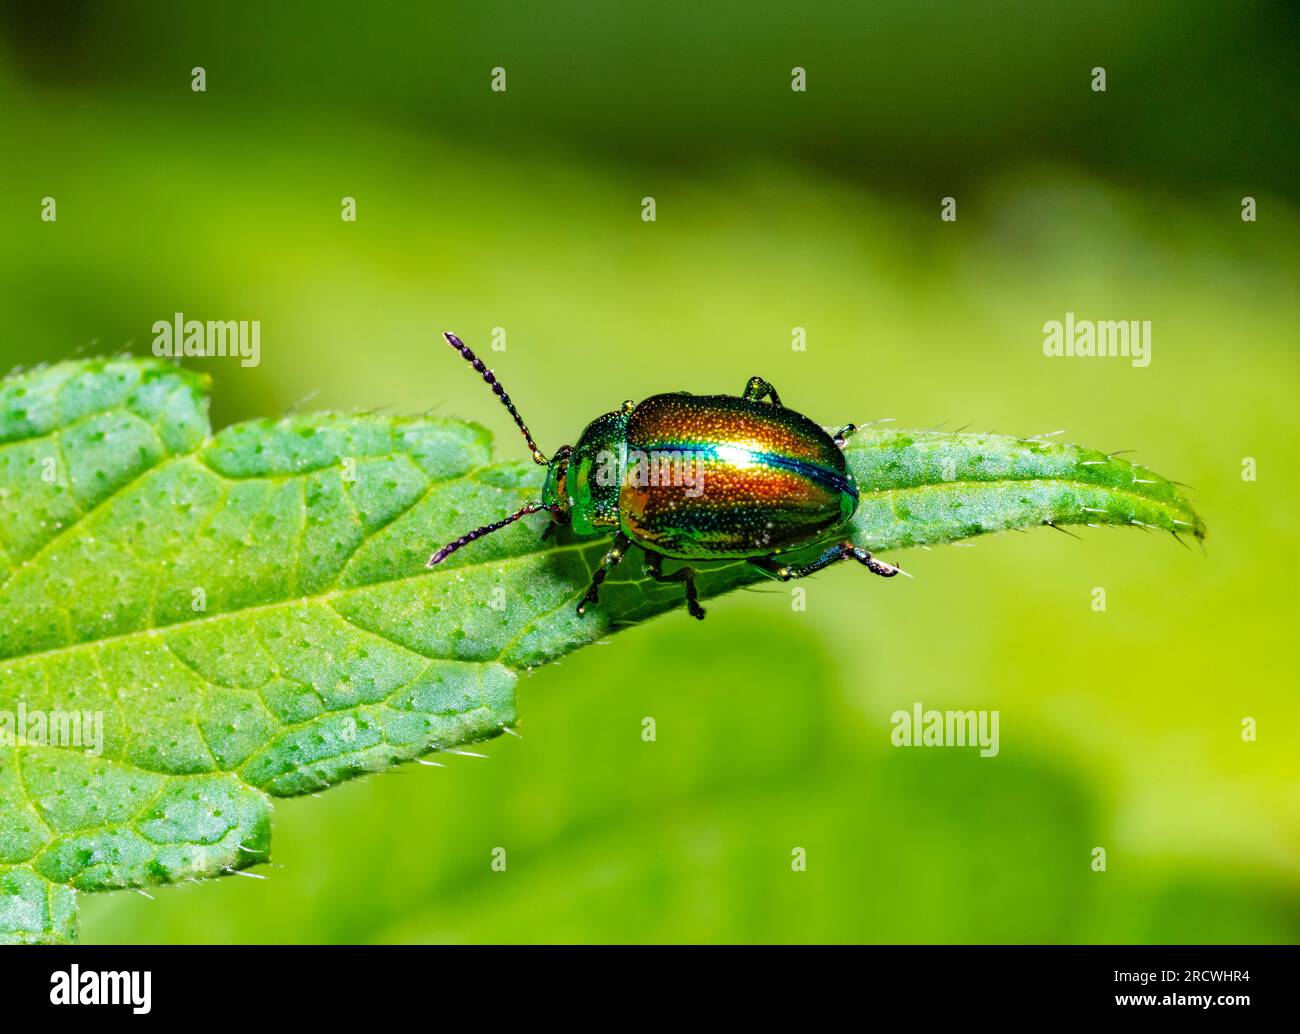 Dead-nettle leaf beetle at the edge of a leaf in green ambiance Stock Photo